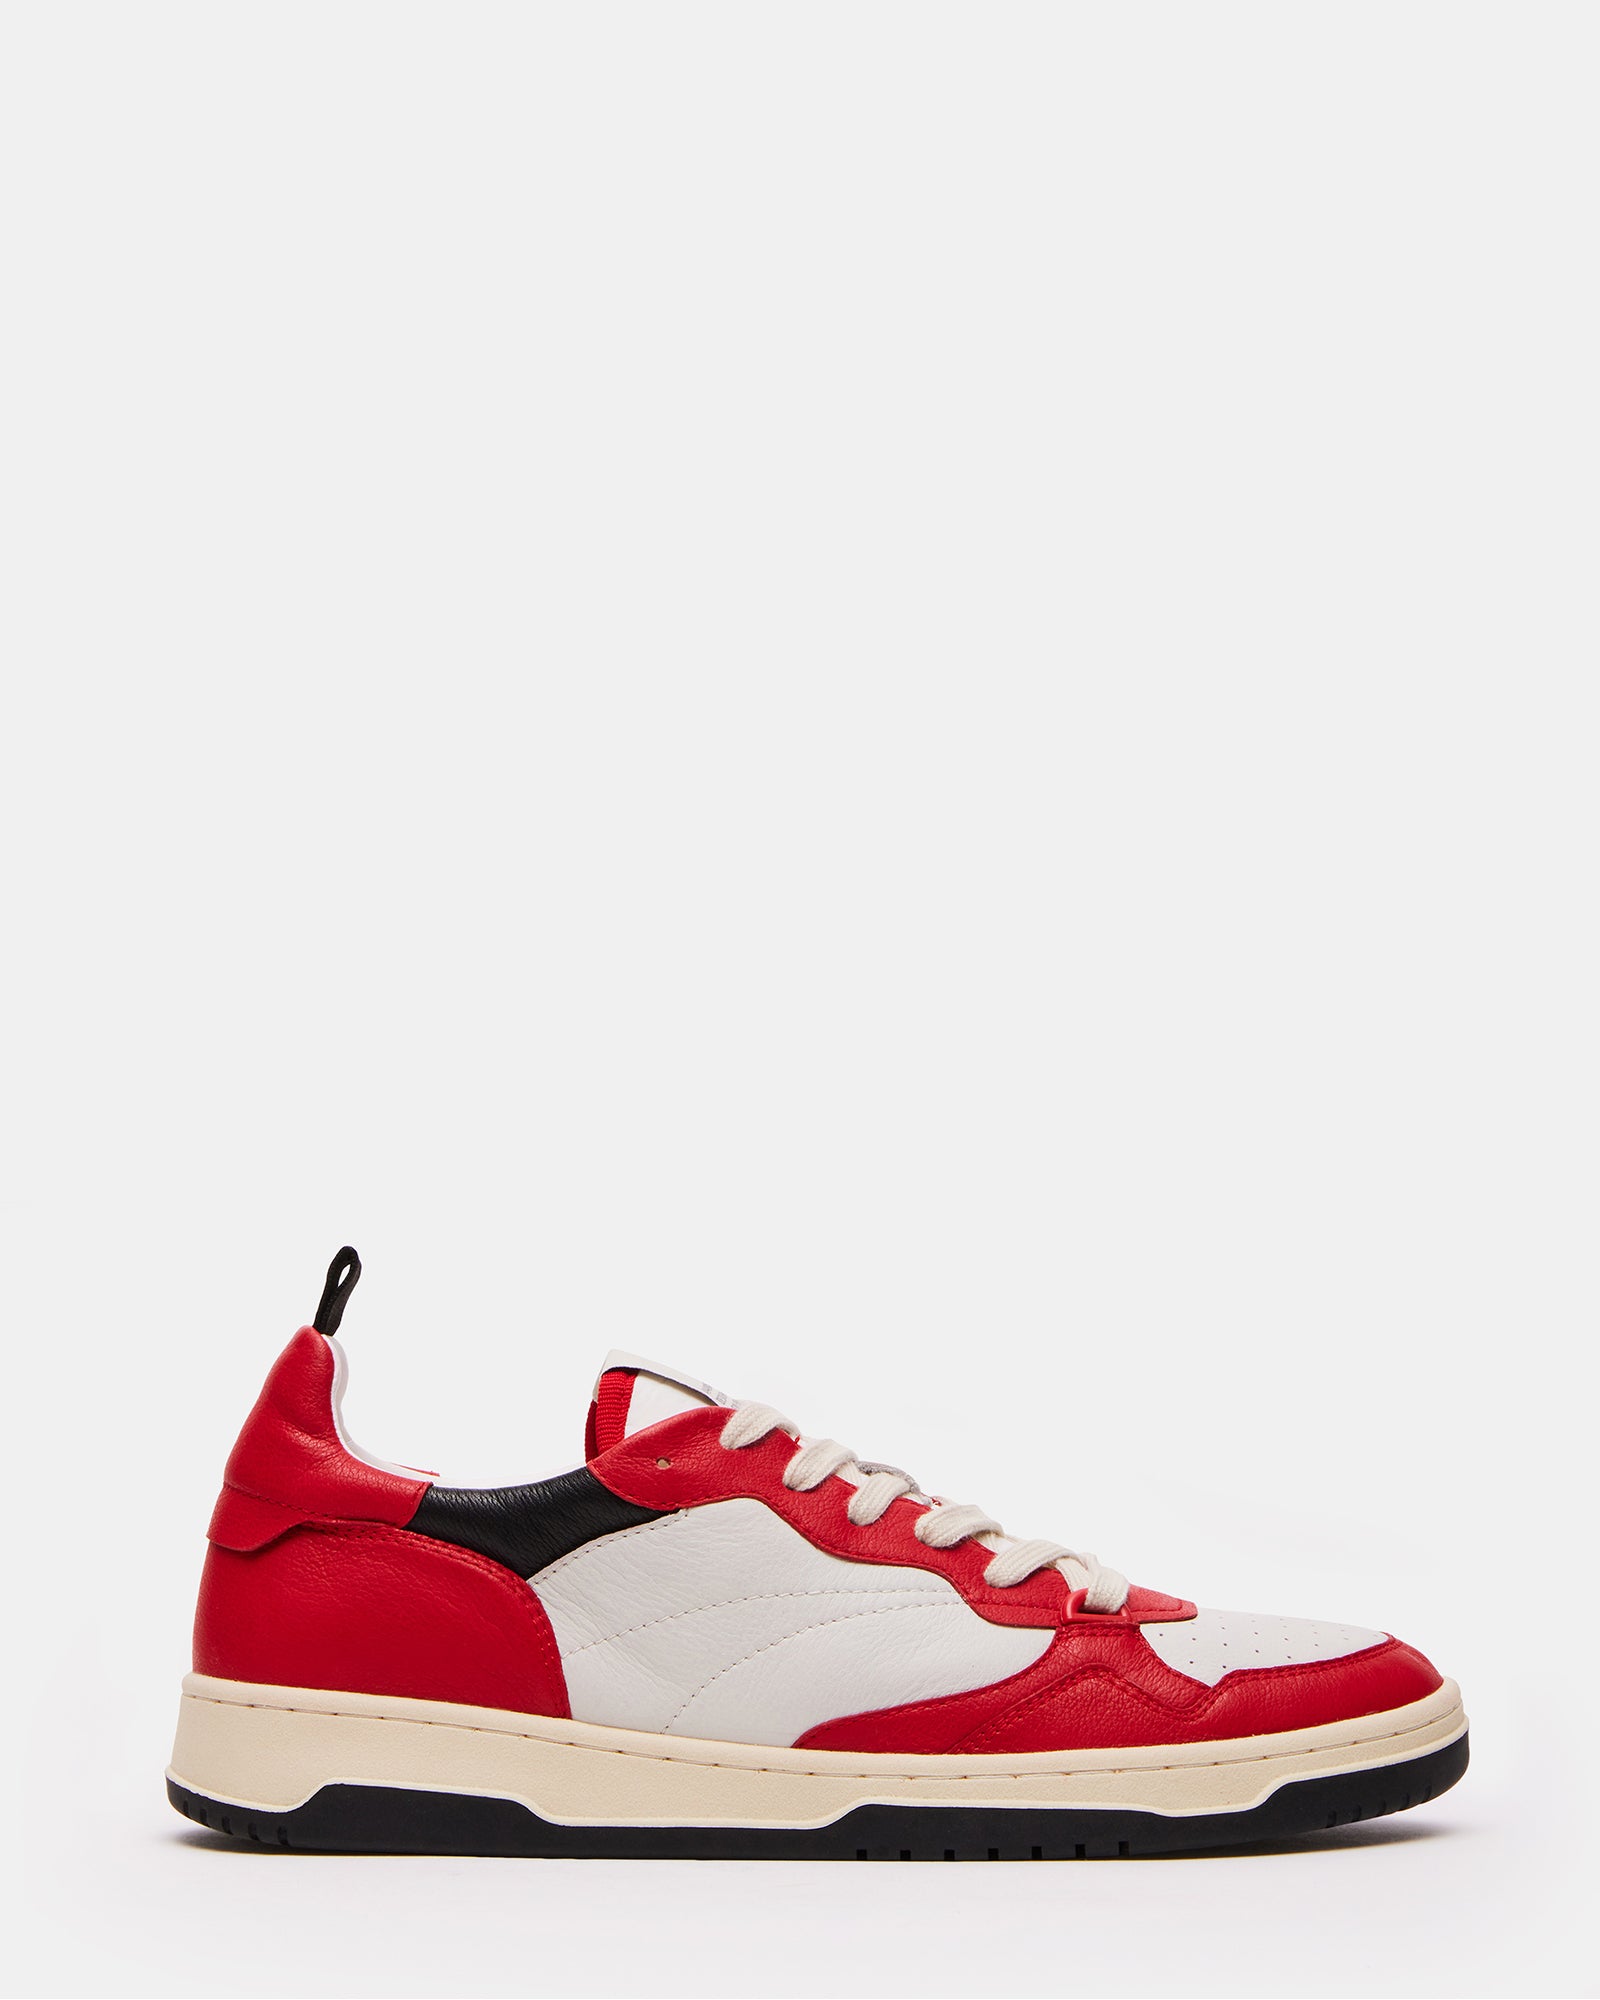 balenciaga shoes red and black - OFF-62% >Free Delivery